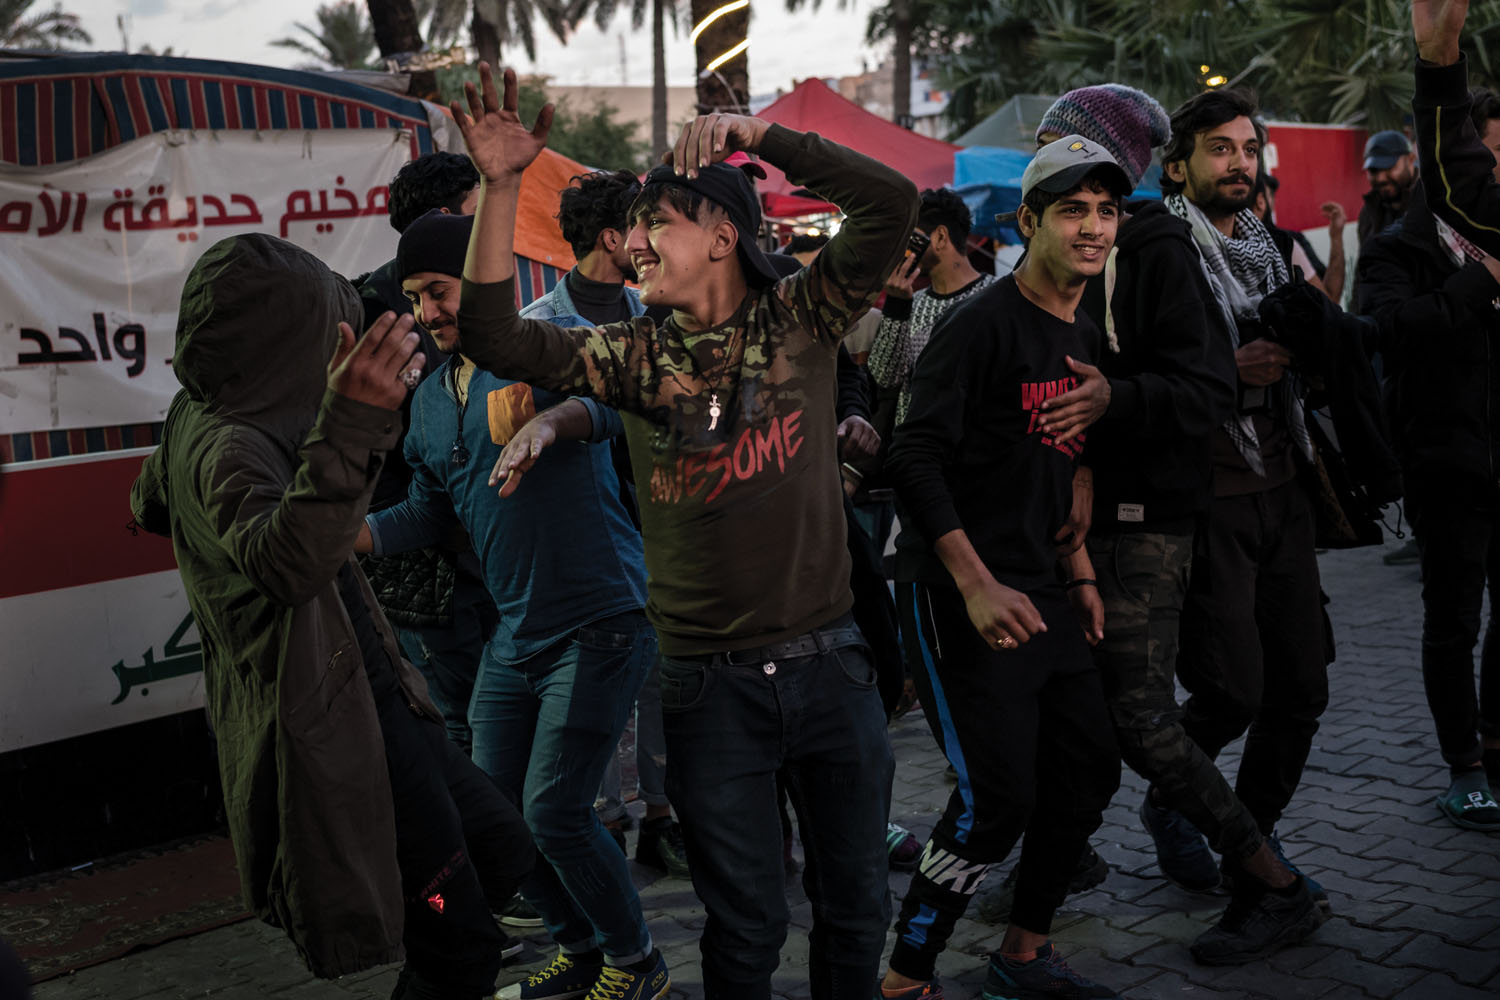 Protesters dance in front of their encampment in Tahrir Square. <i>Tahrir</i> translates to “liberation” or “freedom.”